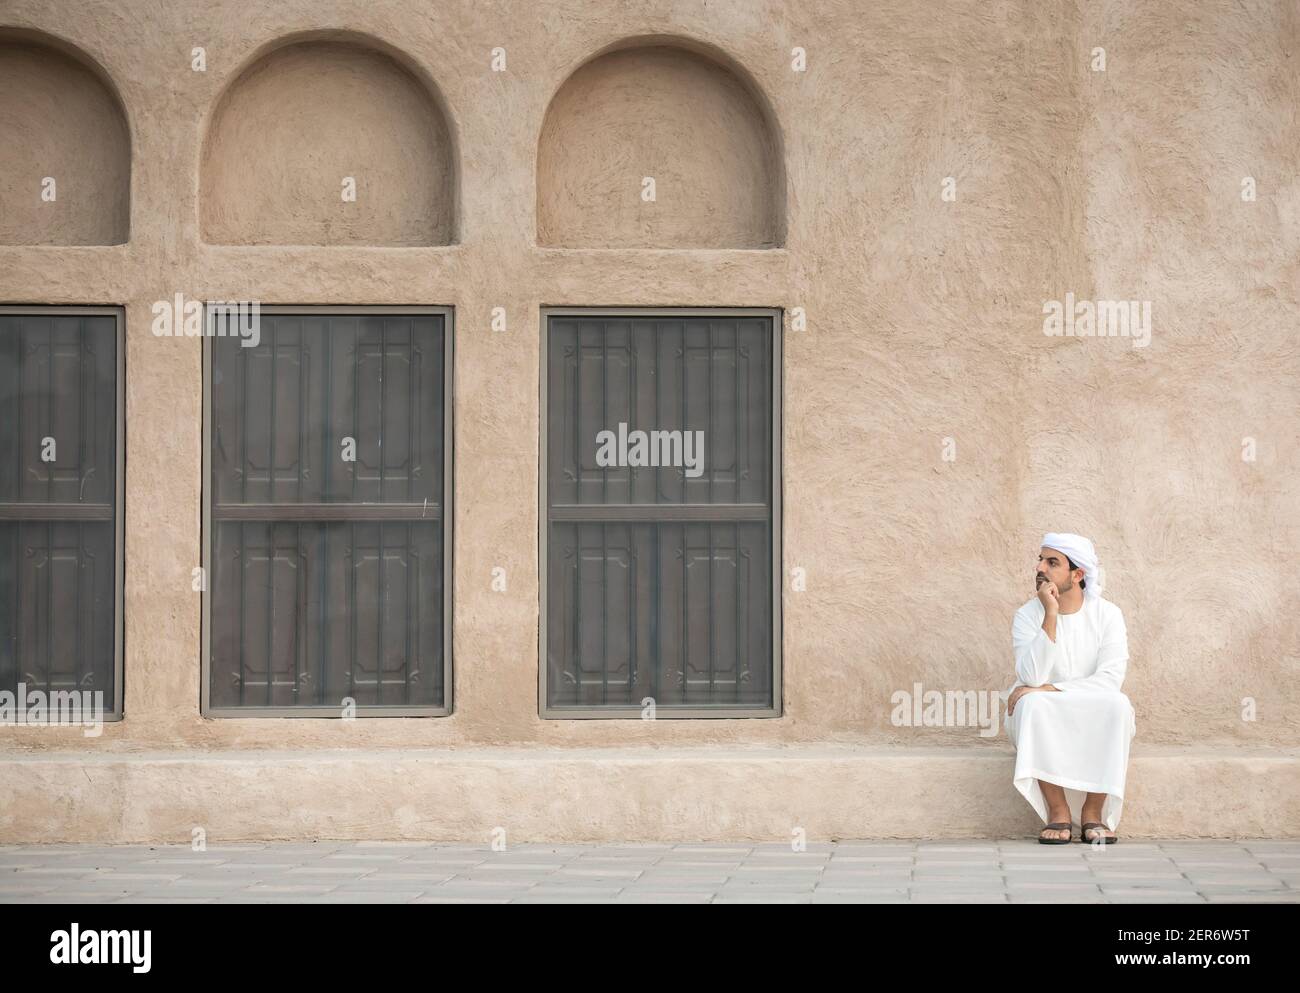 arab man in traditional clothing in historic Shindagha district of Dubai Stock Photo